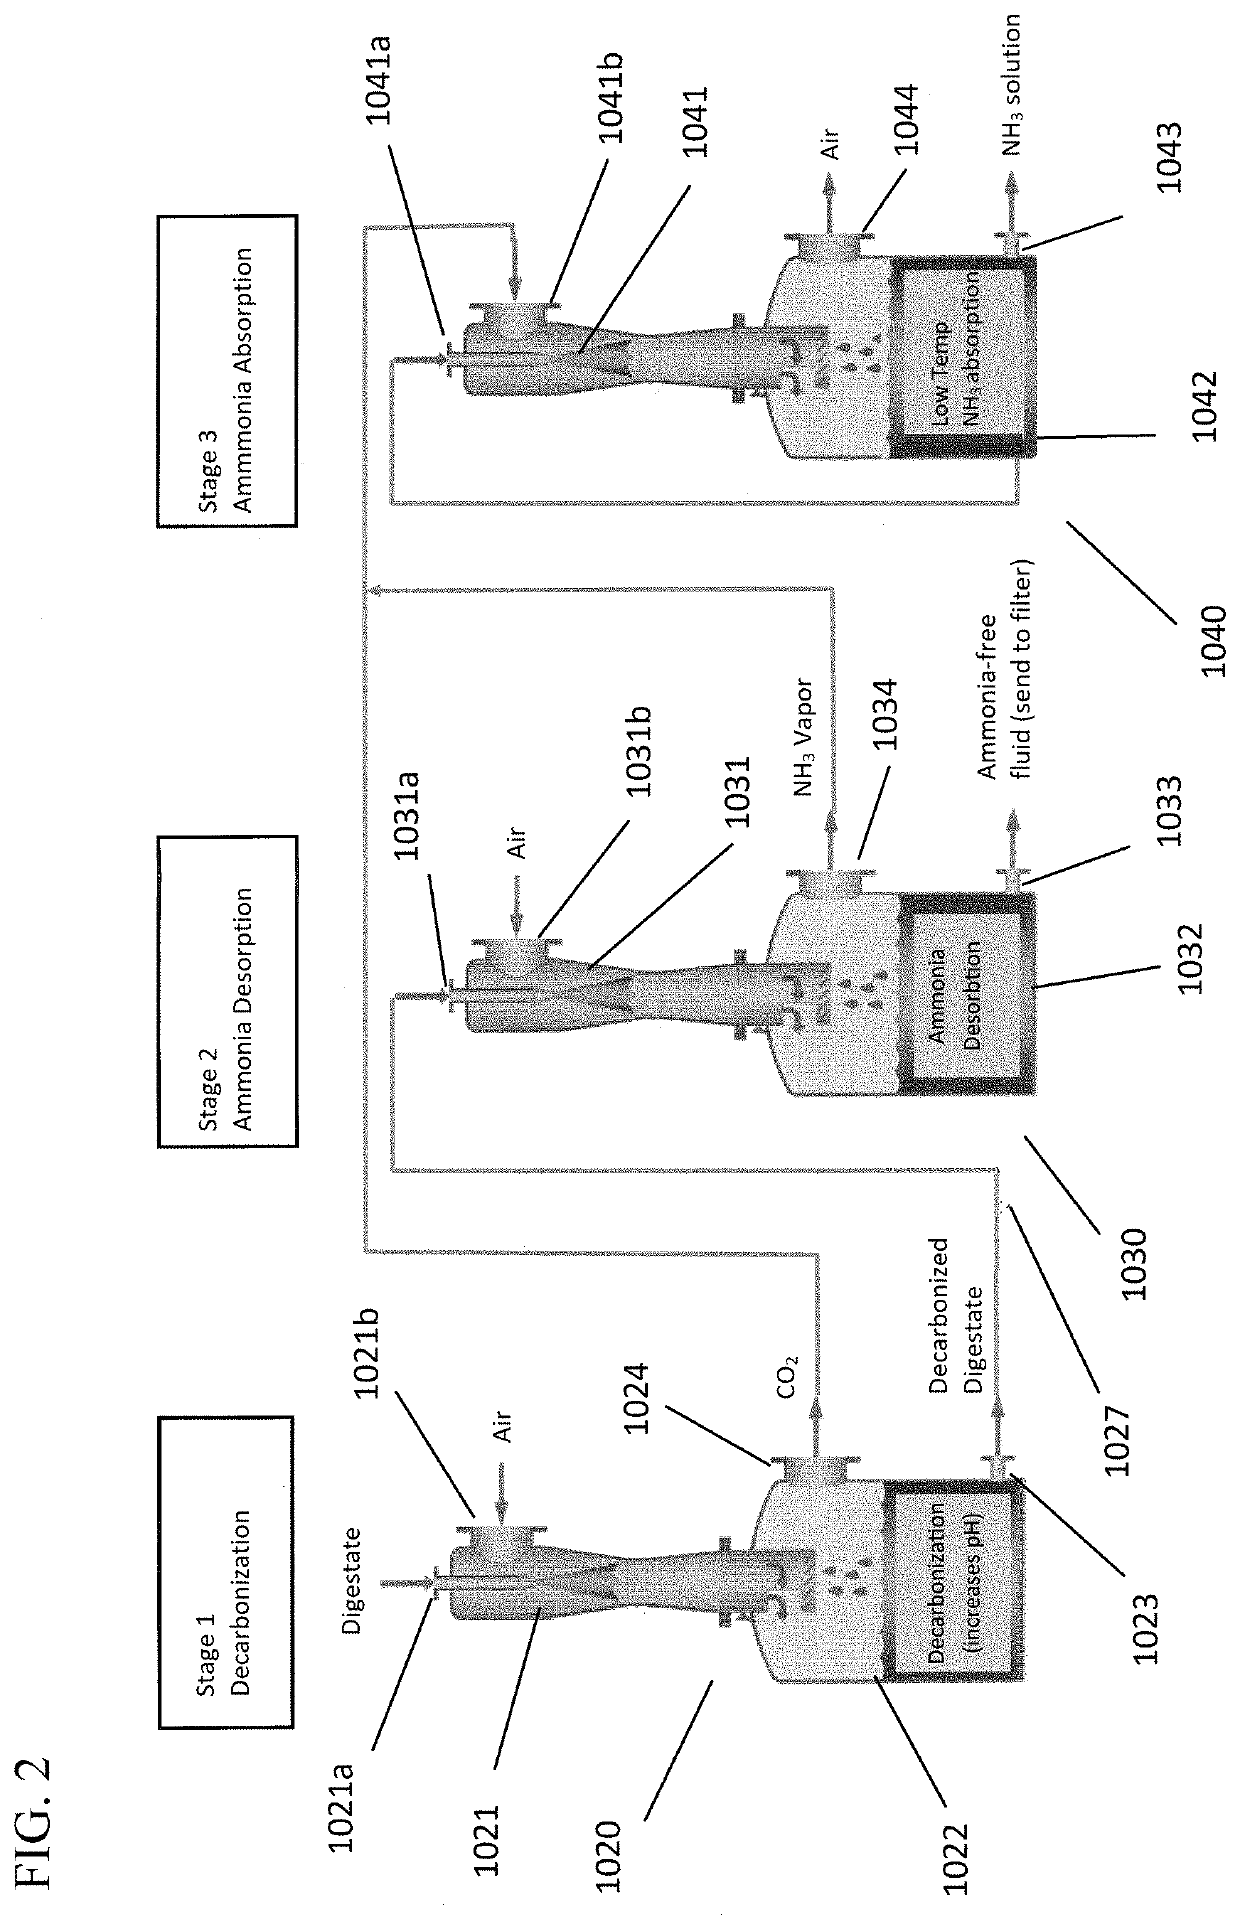 Manufacturing process for producing ammonia from anaerobic digestate liquid